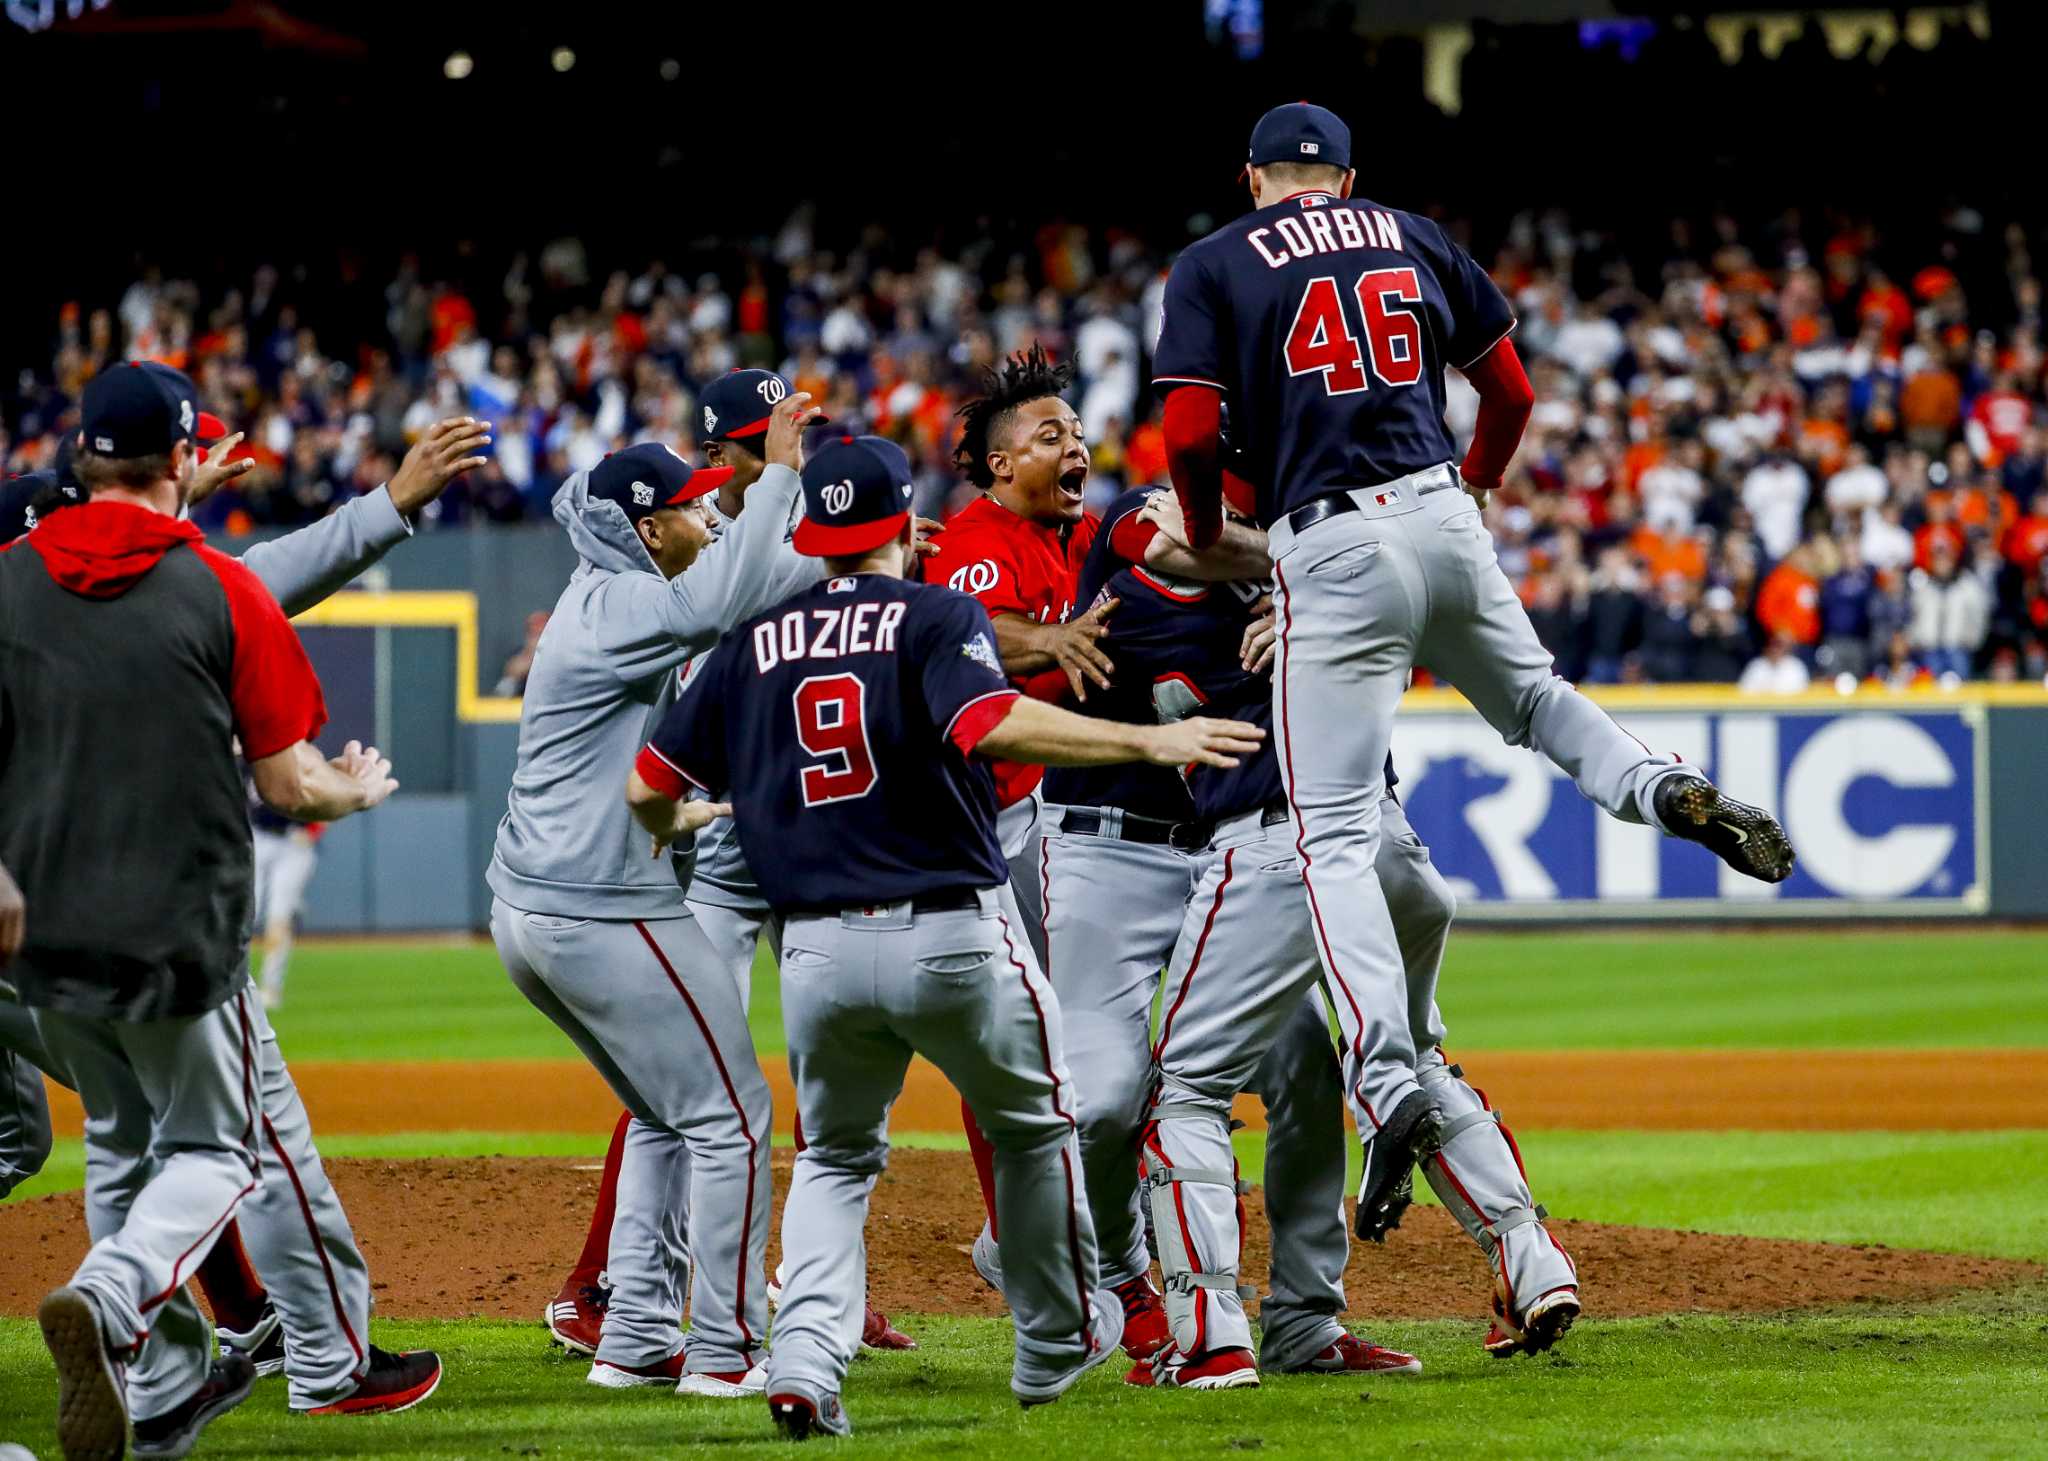 Full Final Inning as Nationals close out Game 7 to win World